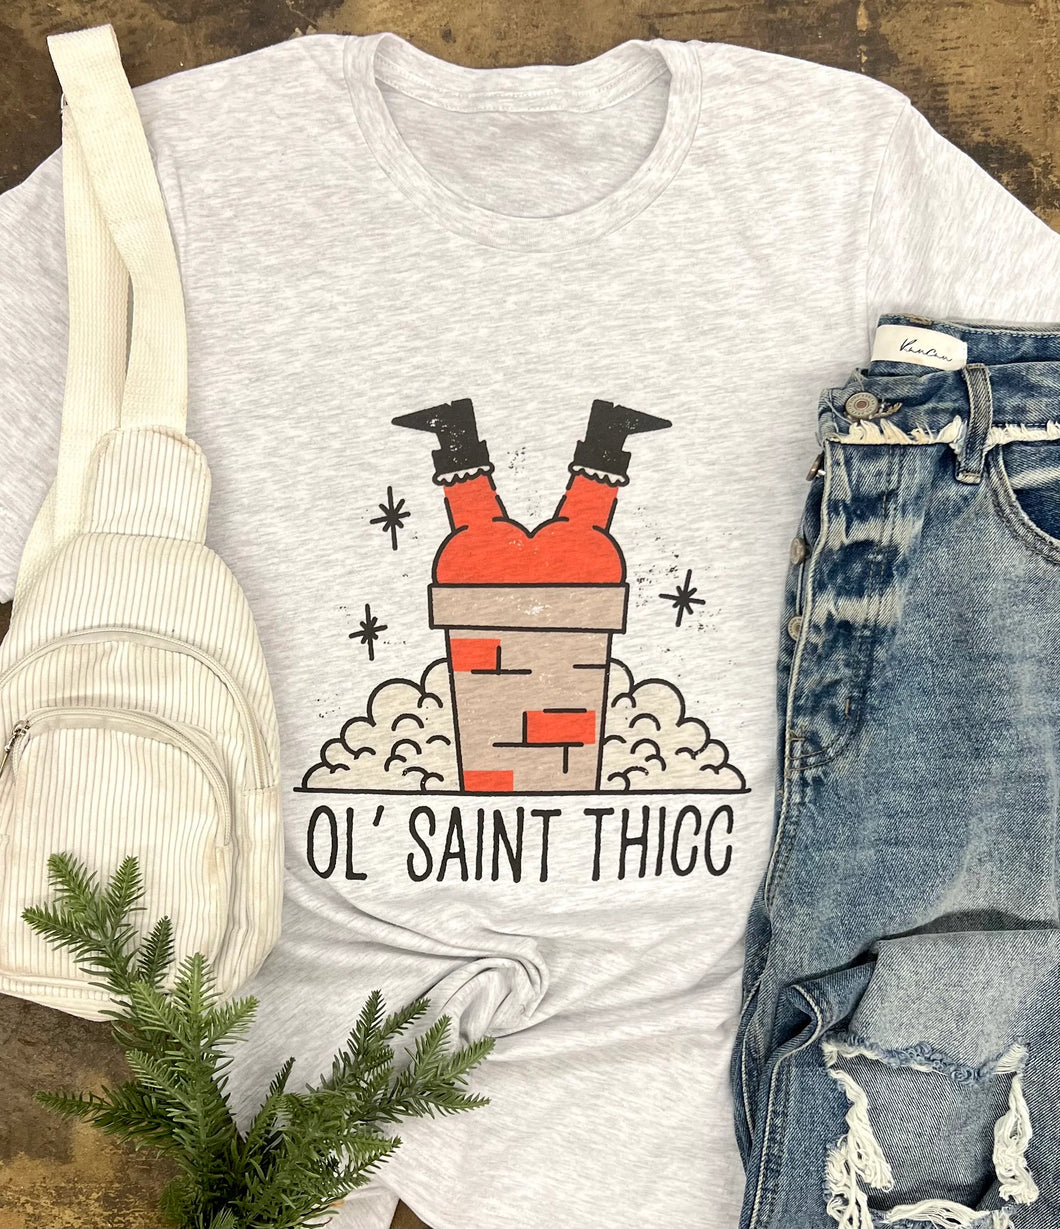 Ol' St. Thicc Tee